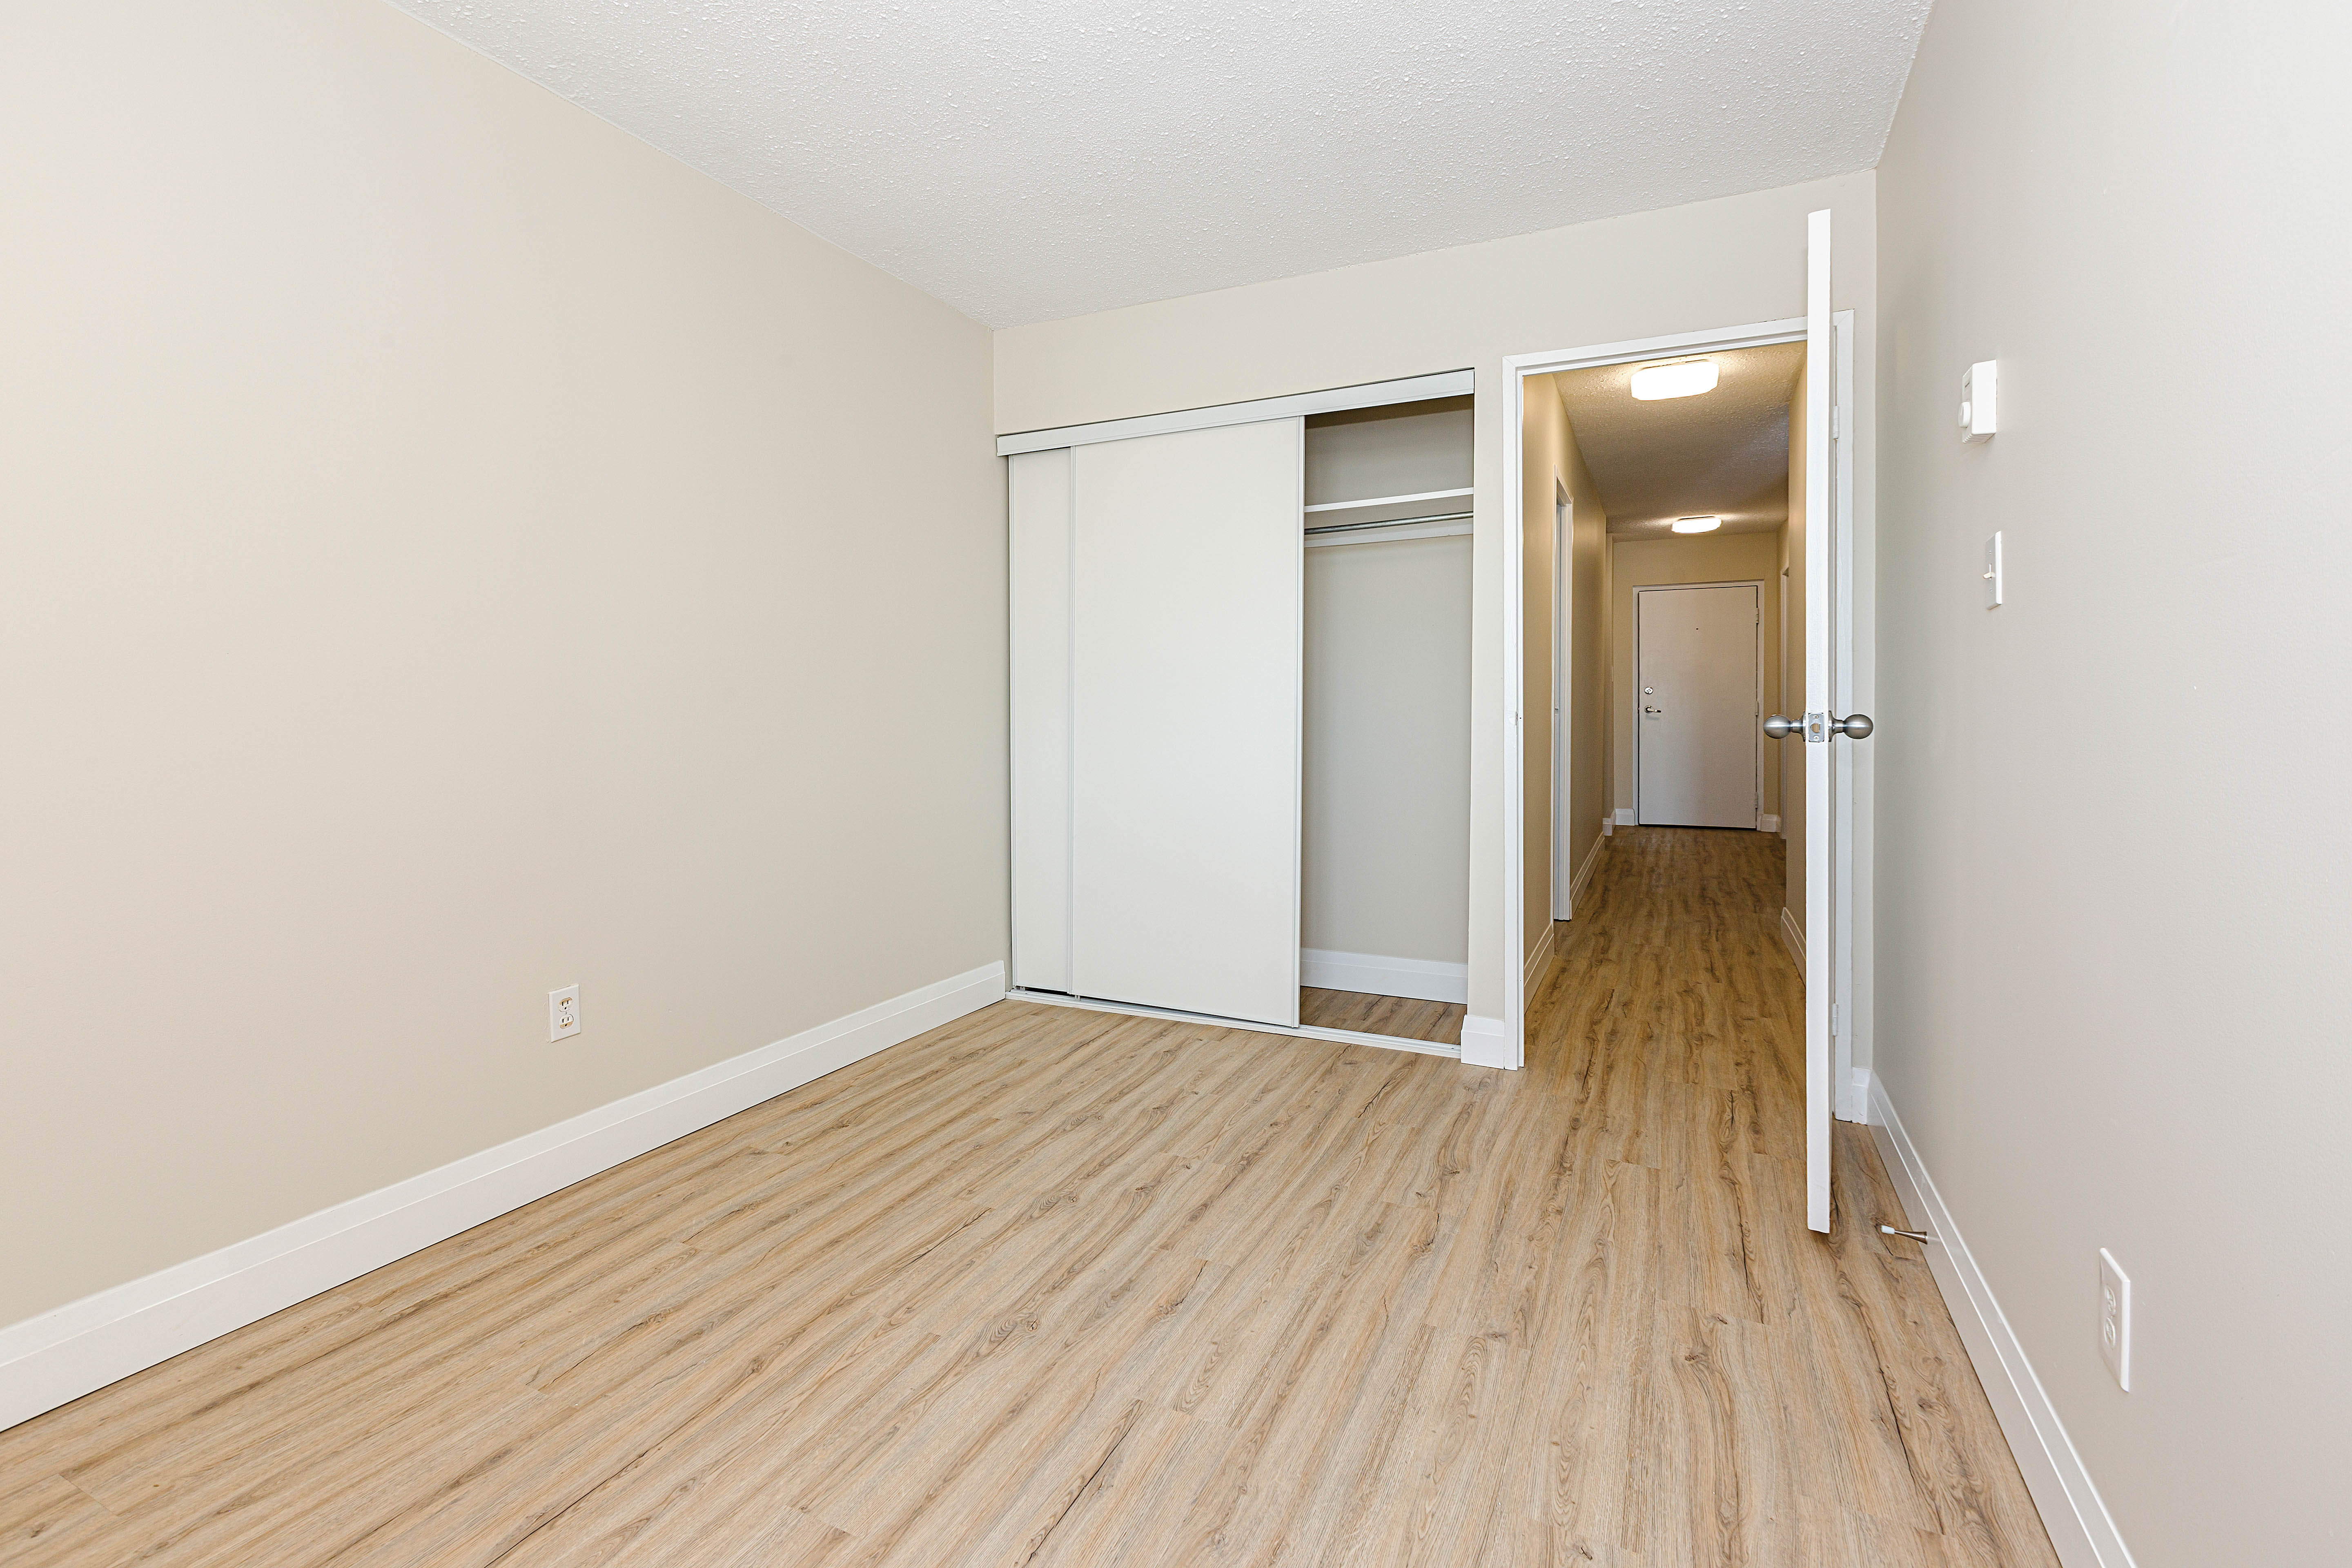 SkyLiving RiversideApartments 1214RiversideDR Timmins Unit111 TwoBed OneBath 0004 bedroom1